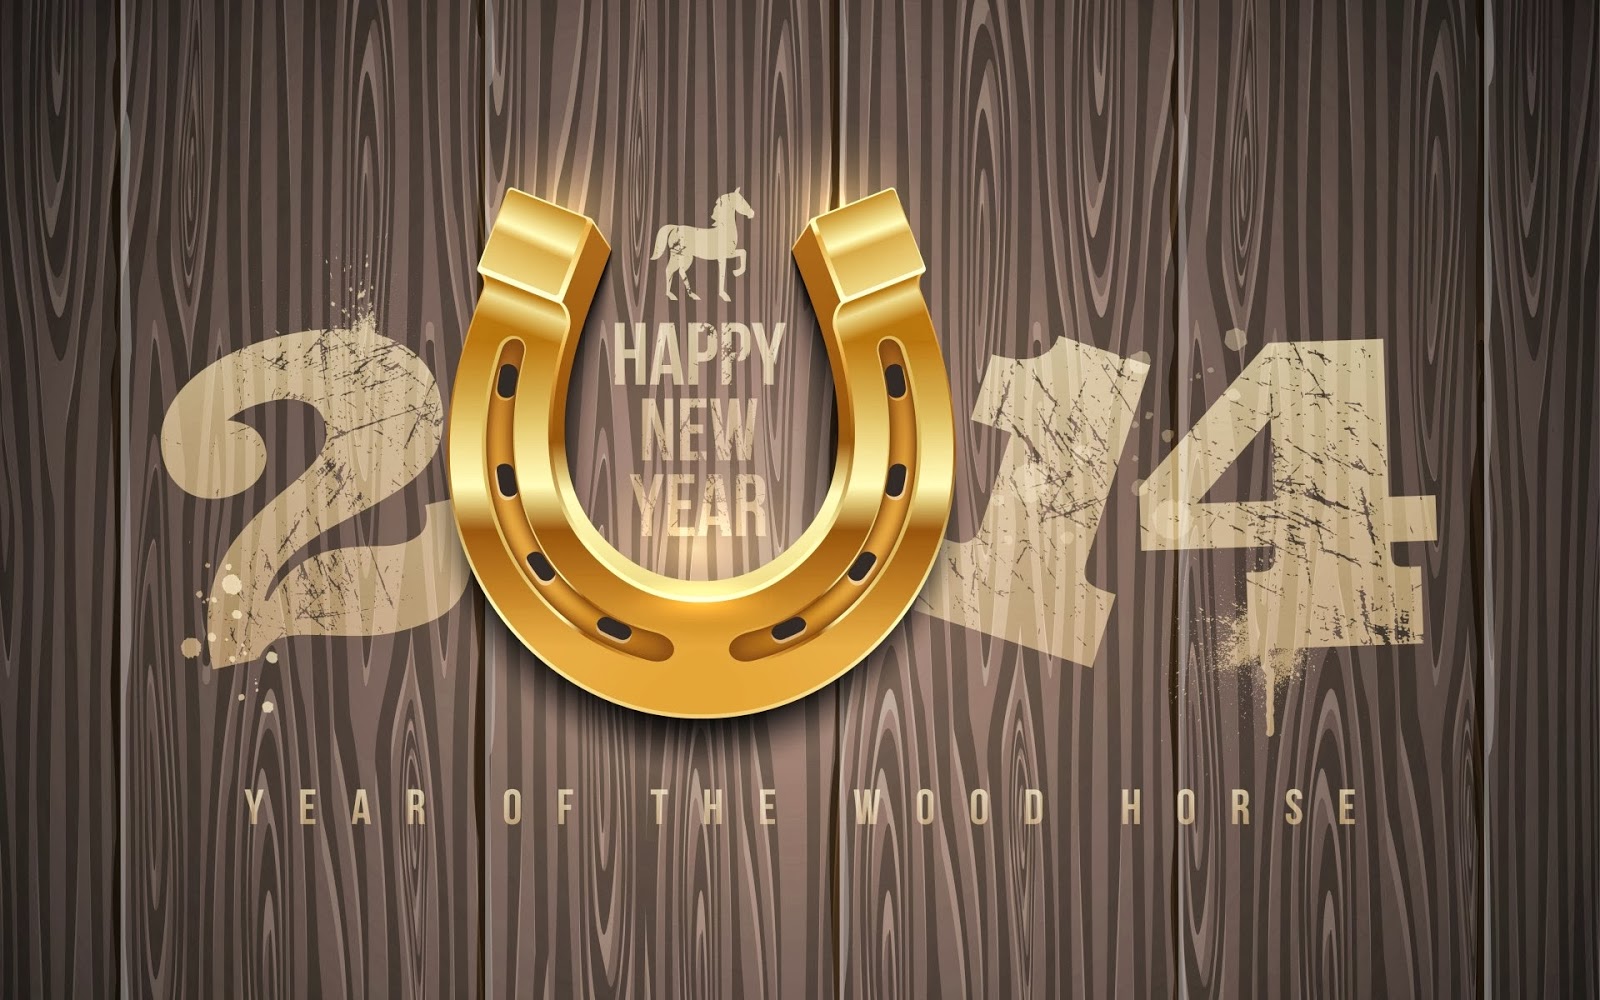 ... of the Horse 2014 - Chinese Horoscope Horse Year - HD Wallpapers Blog